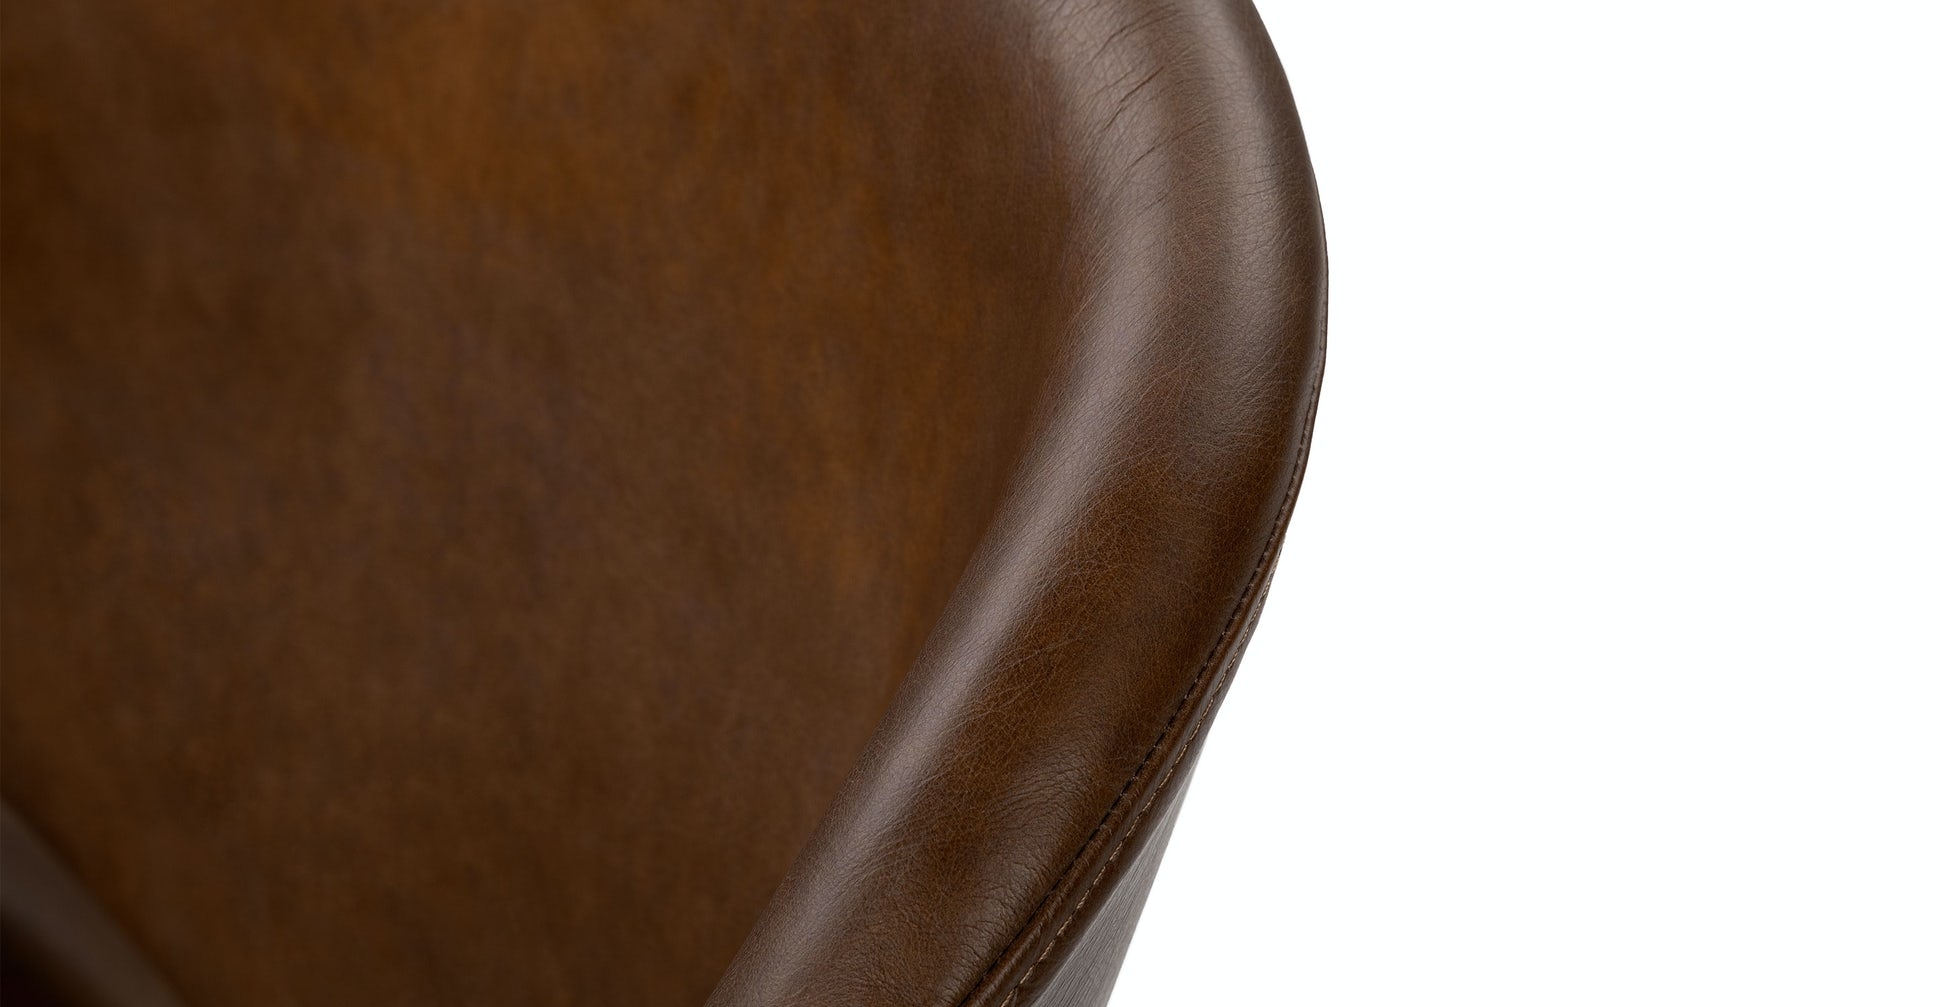 Levo brown leather lounge chair - Image 5